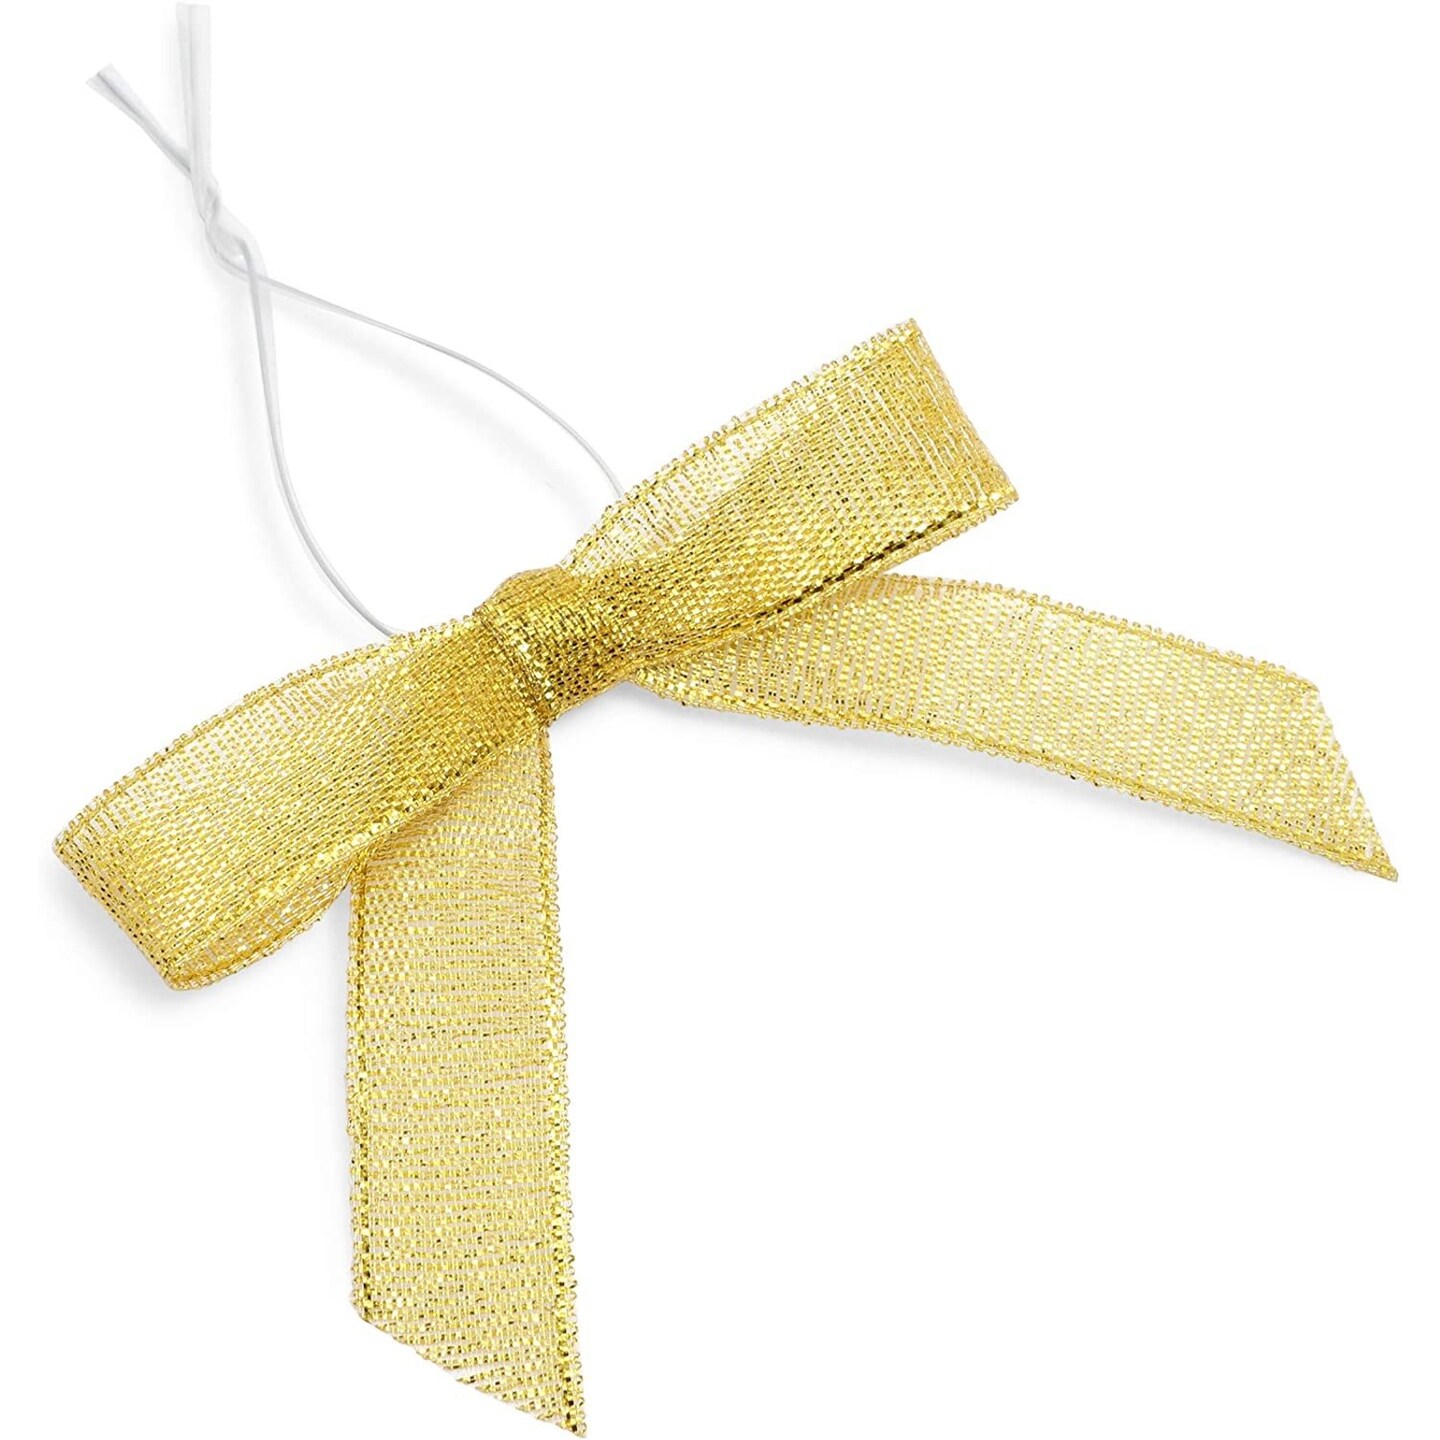 Hand tied Bows - Wired Indoor Outdoor Brown Velvet Bow 6 Inch